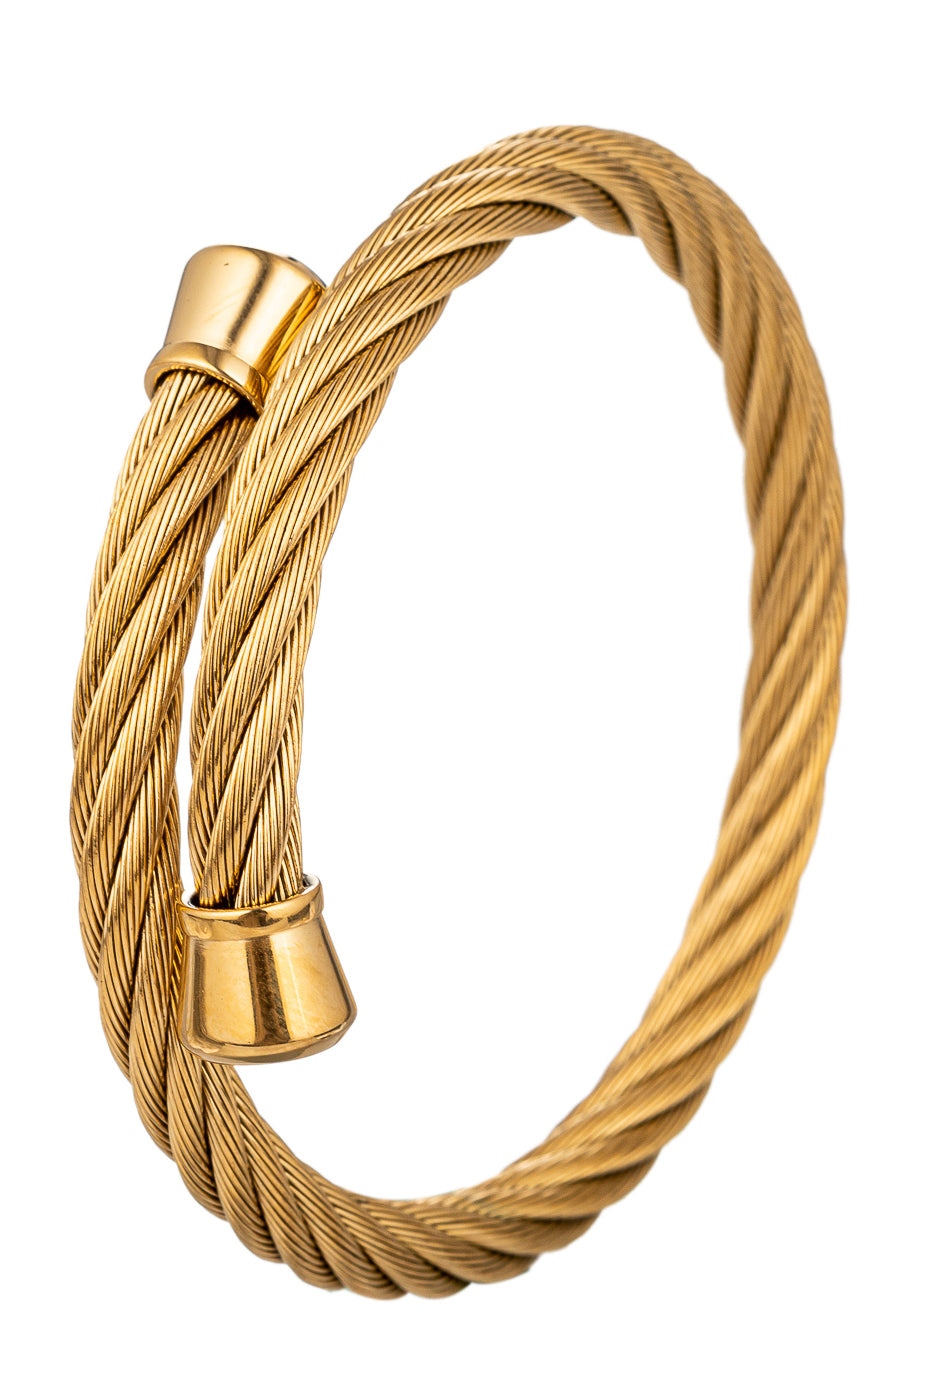 Embrace Elegance with the Henry Titanium Wire Cuff Bracelet in Gold Tone.